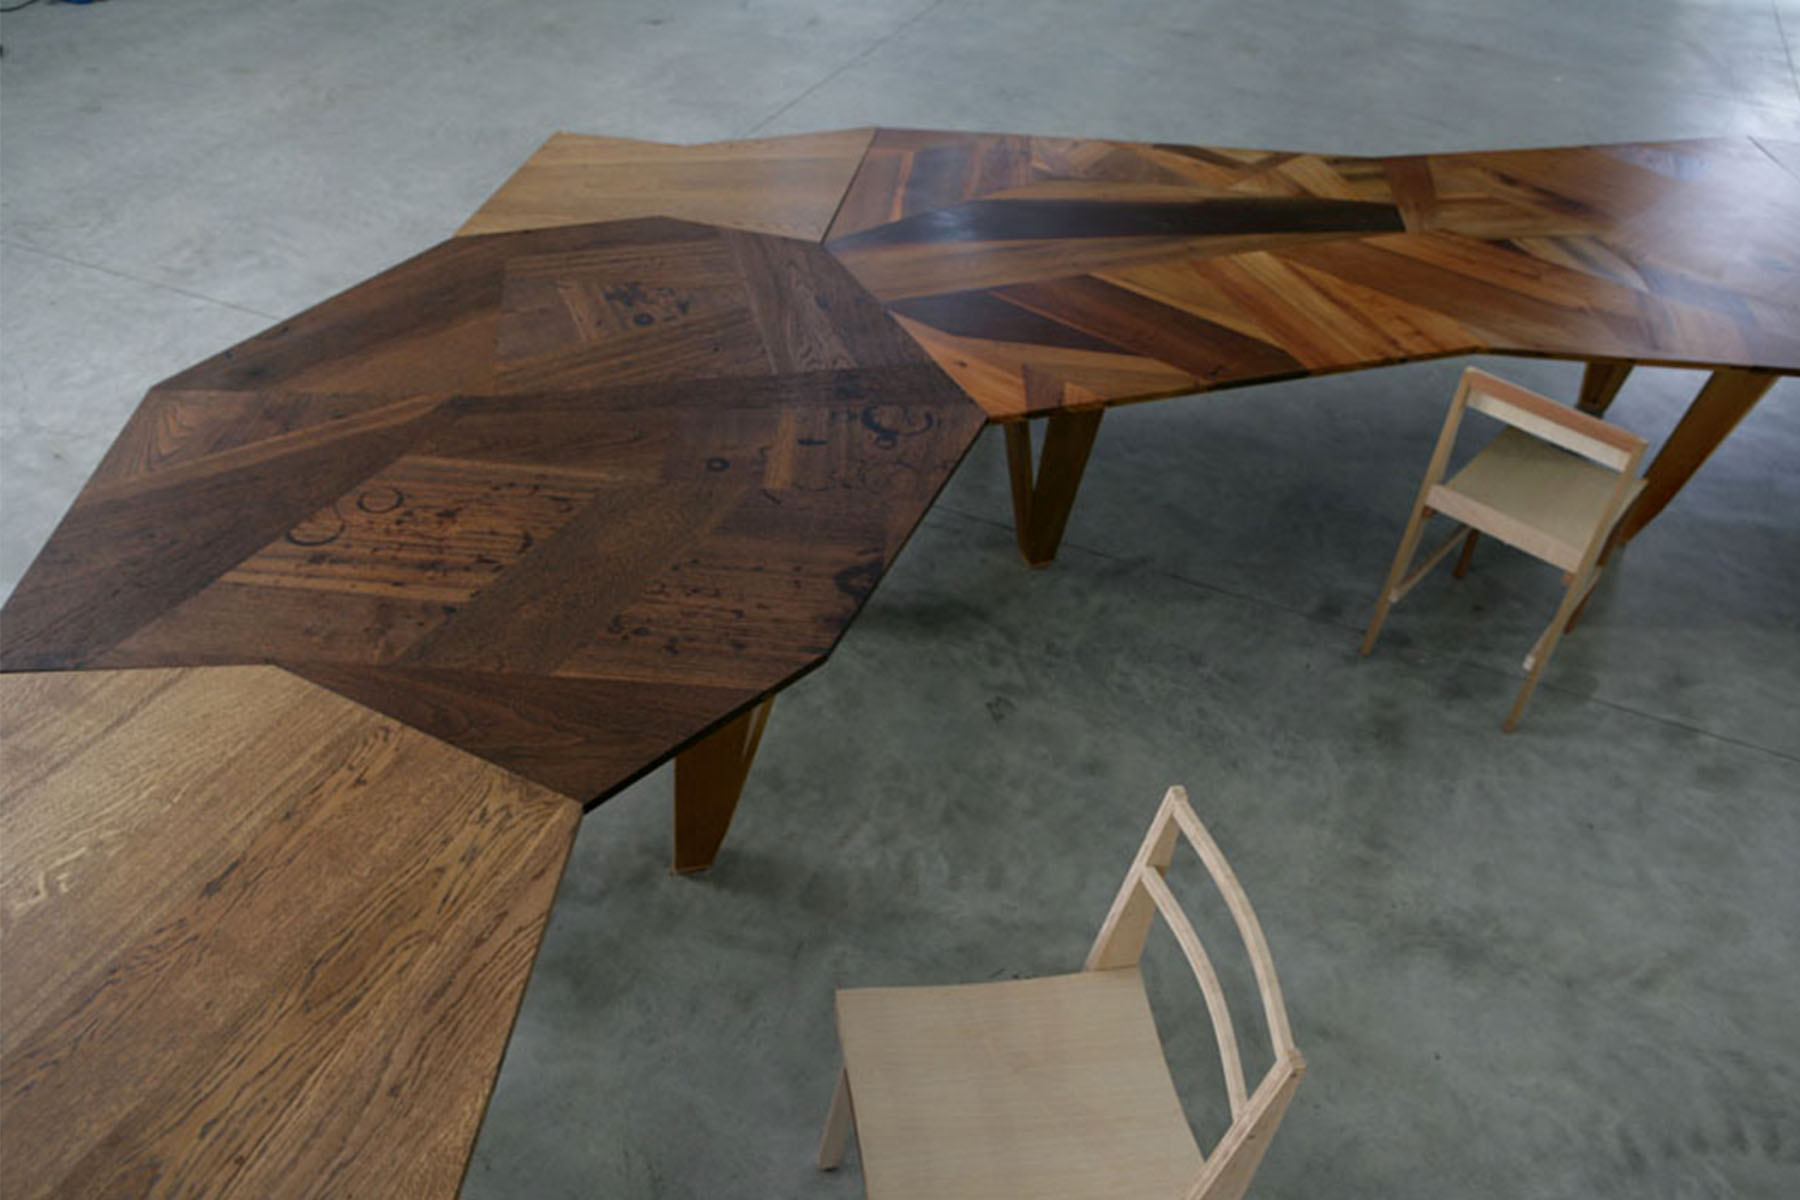 'Total Trattoria' project - 'Off Cut' table Martino Gamper pic-4